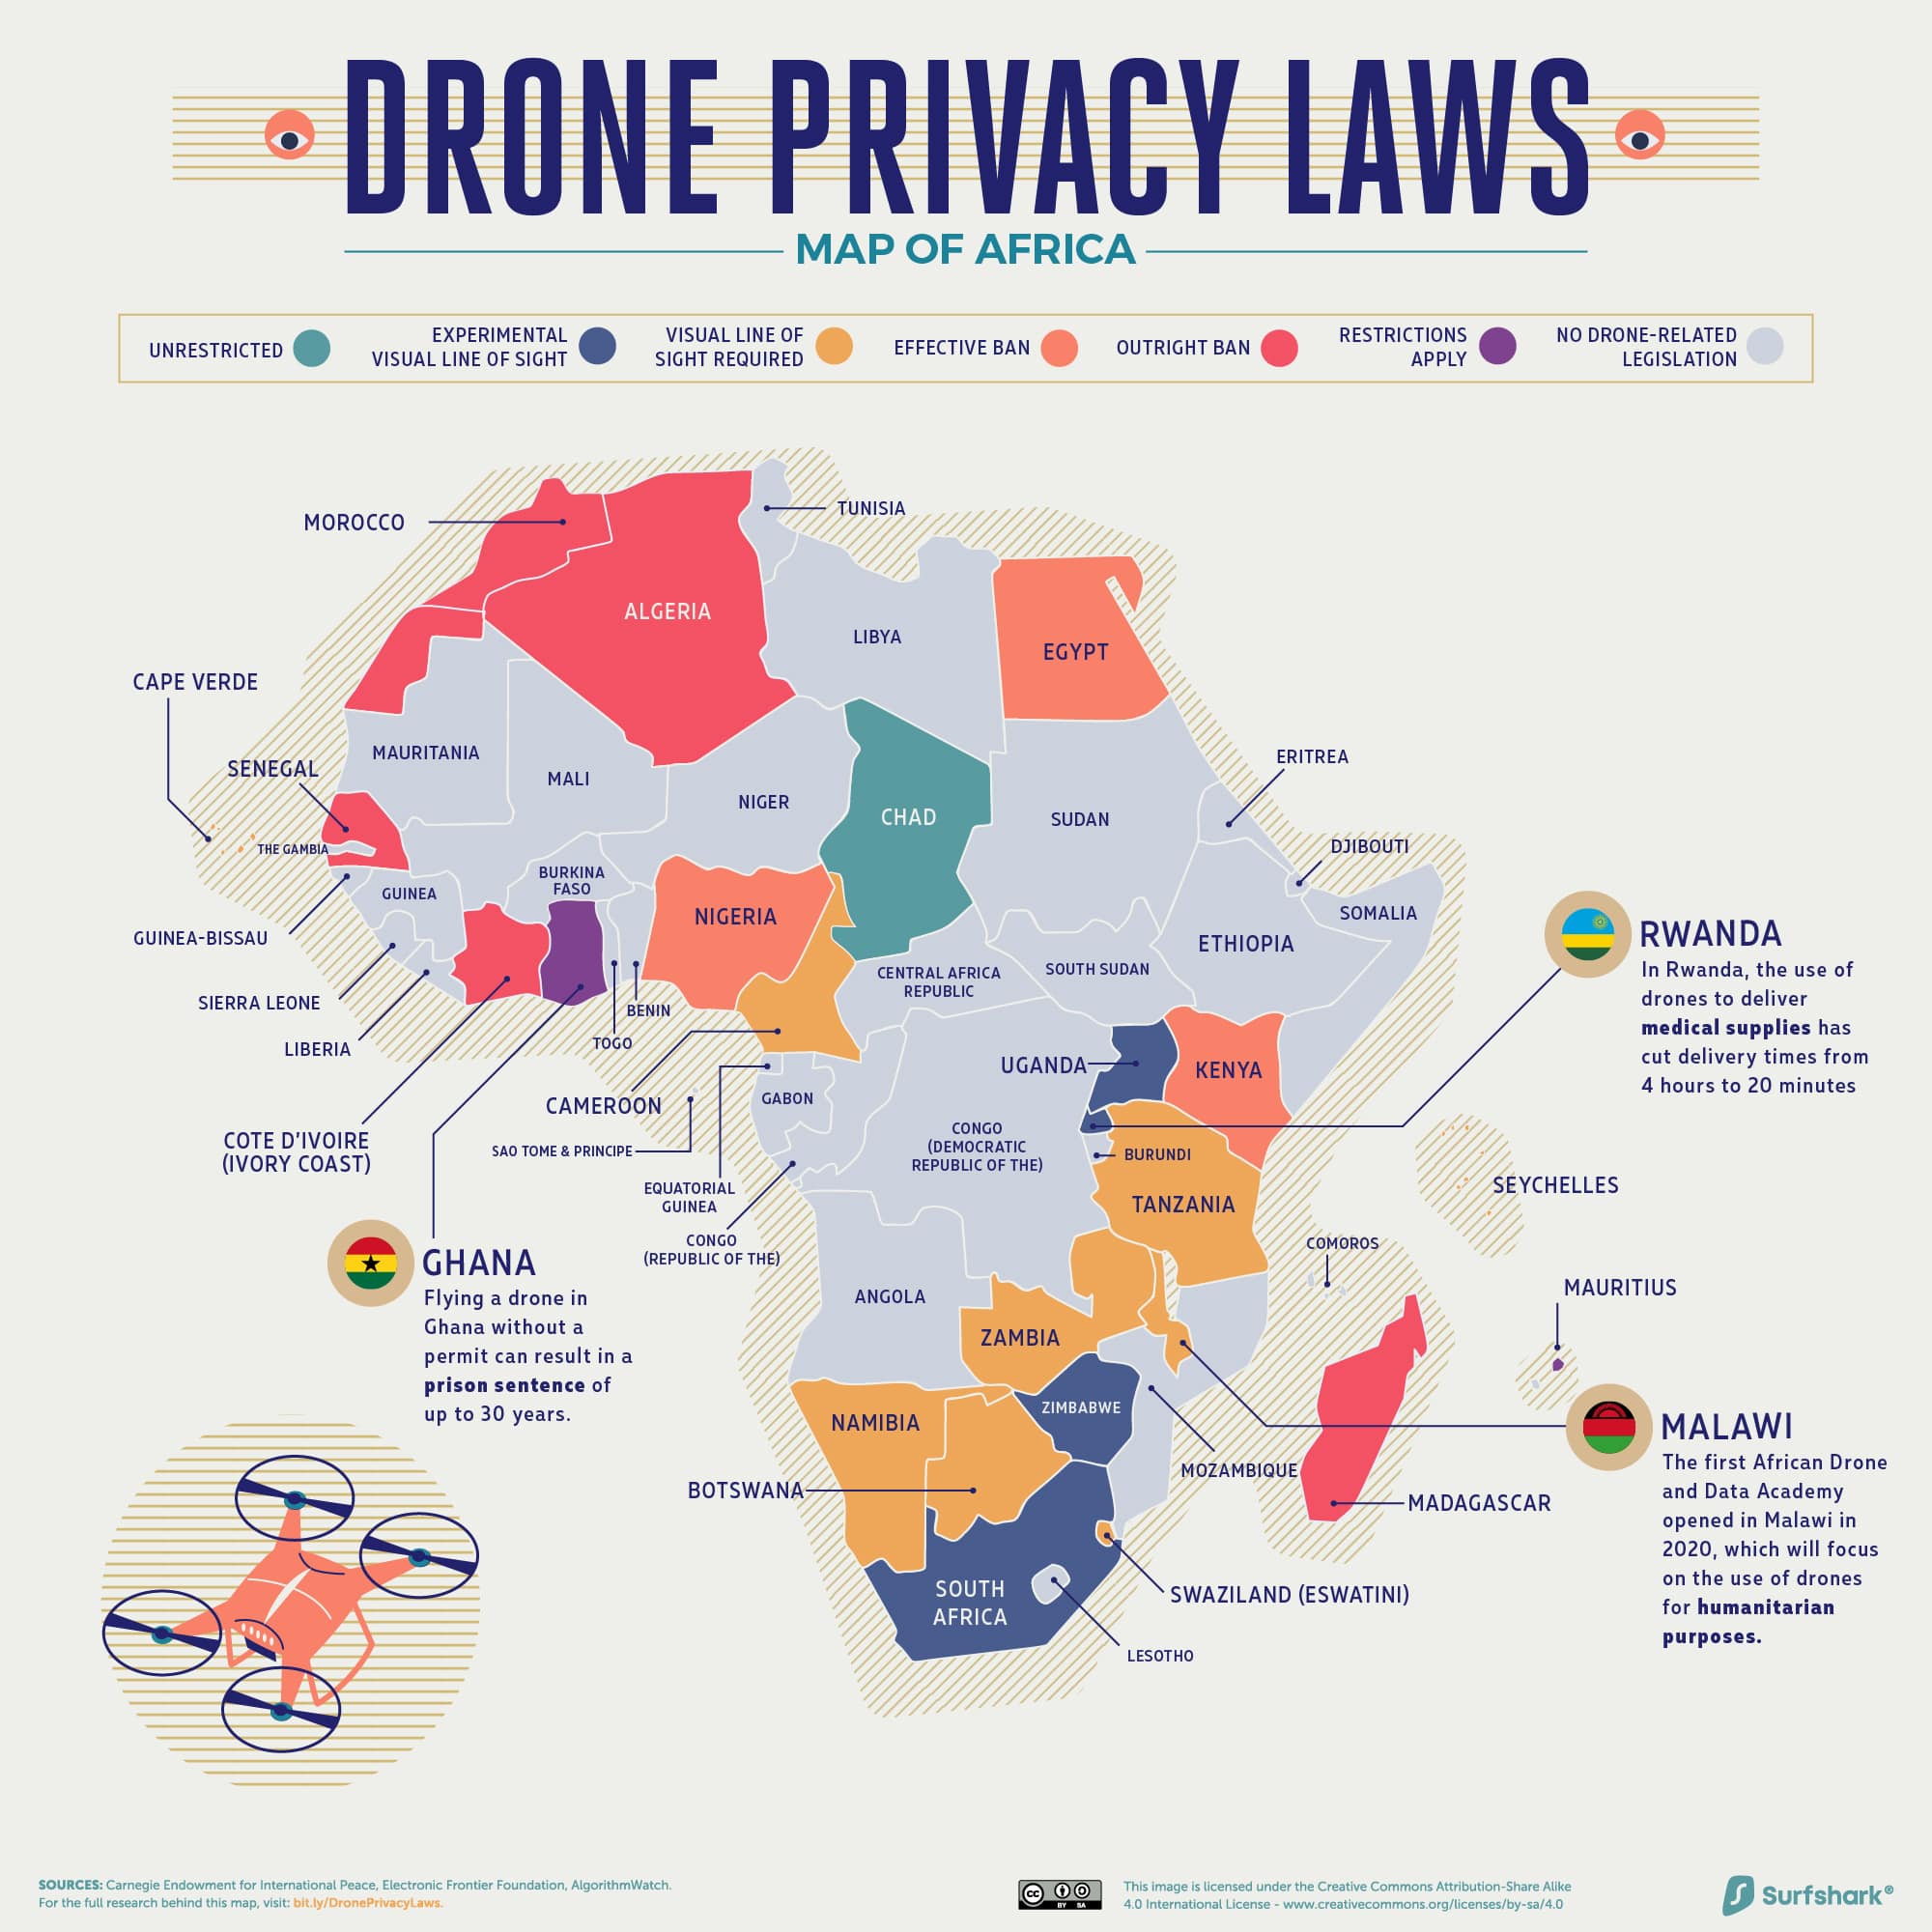 a map of Africa with drone privacy laws for each country coded in color